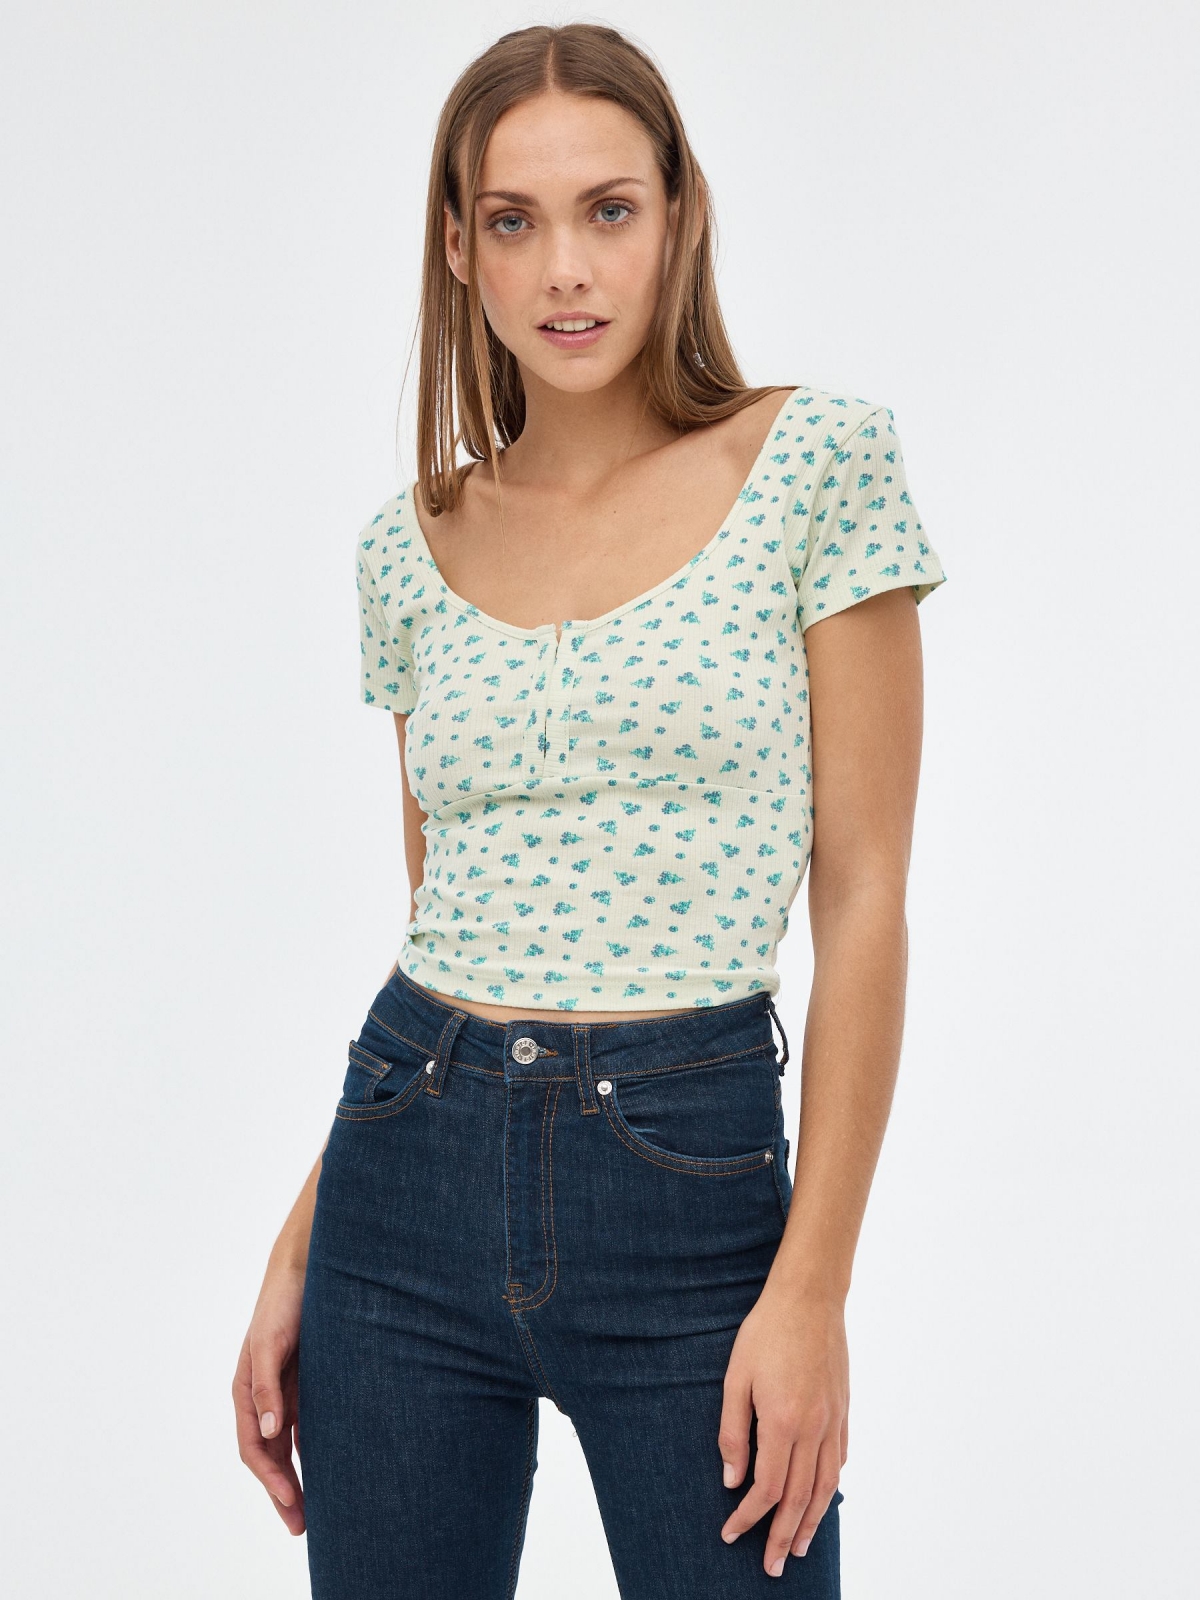 Floral print top light green middle front view